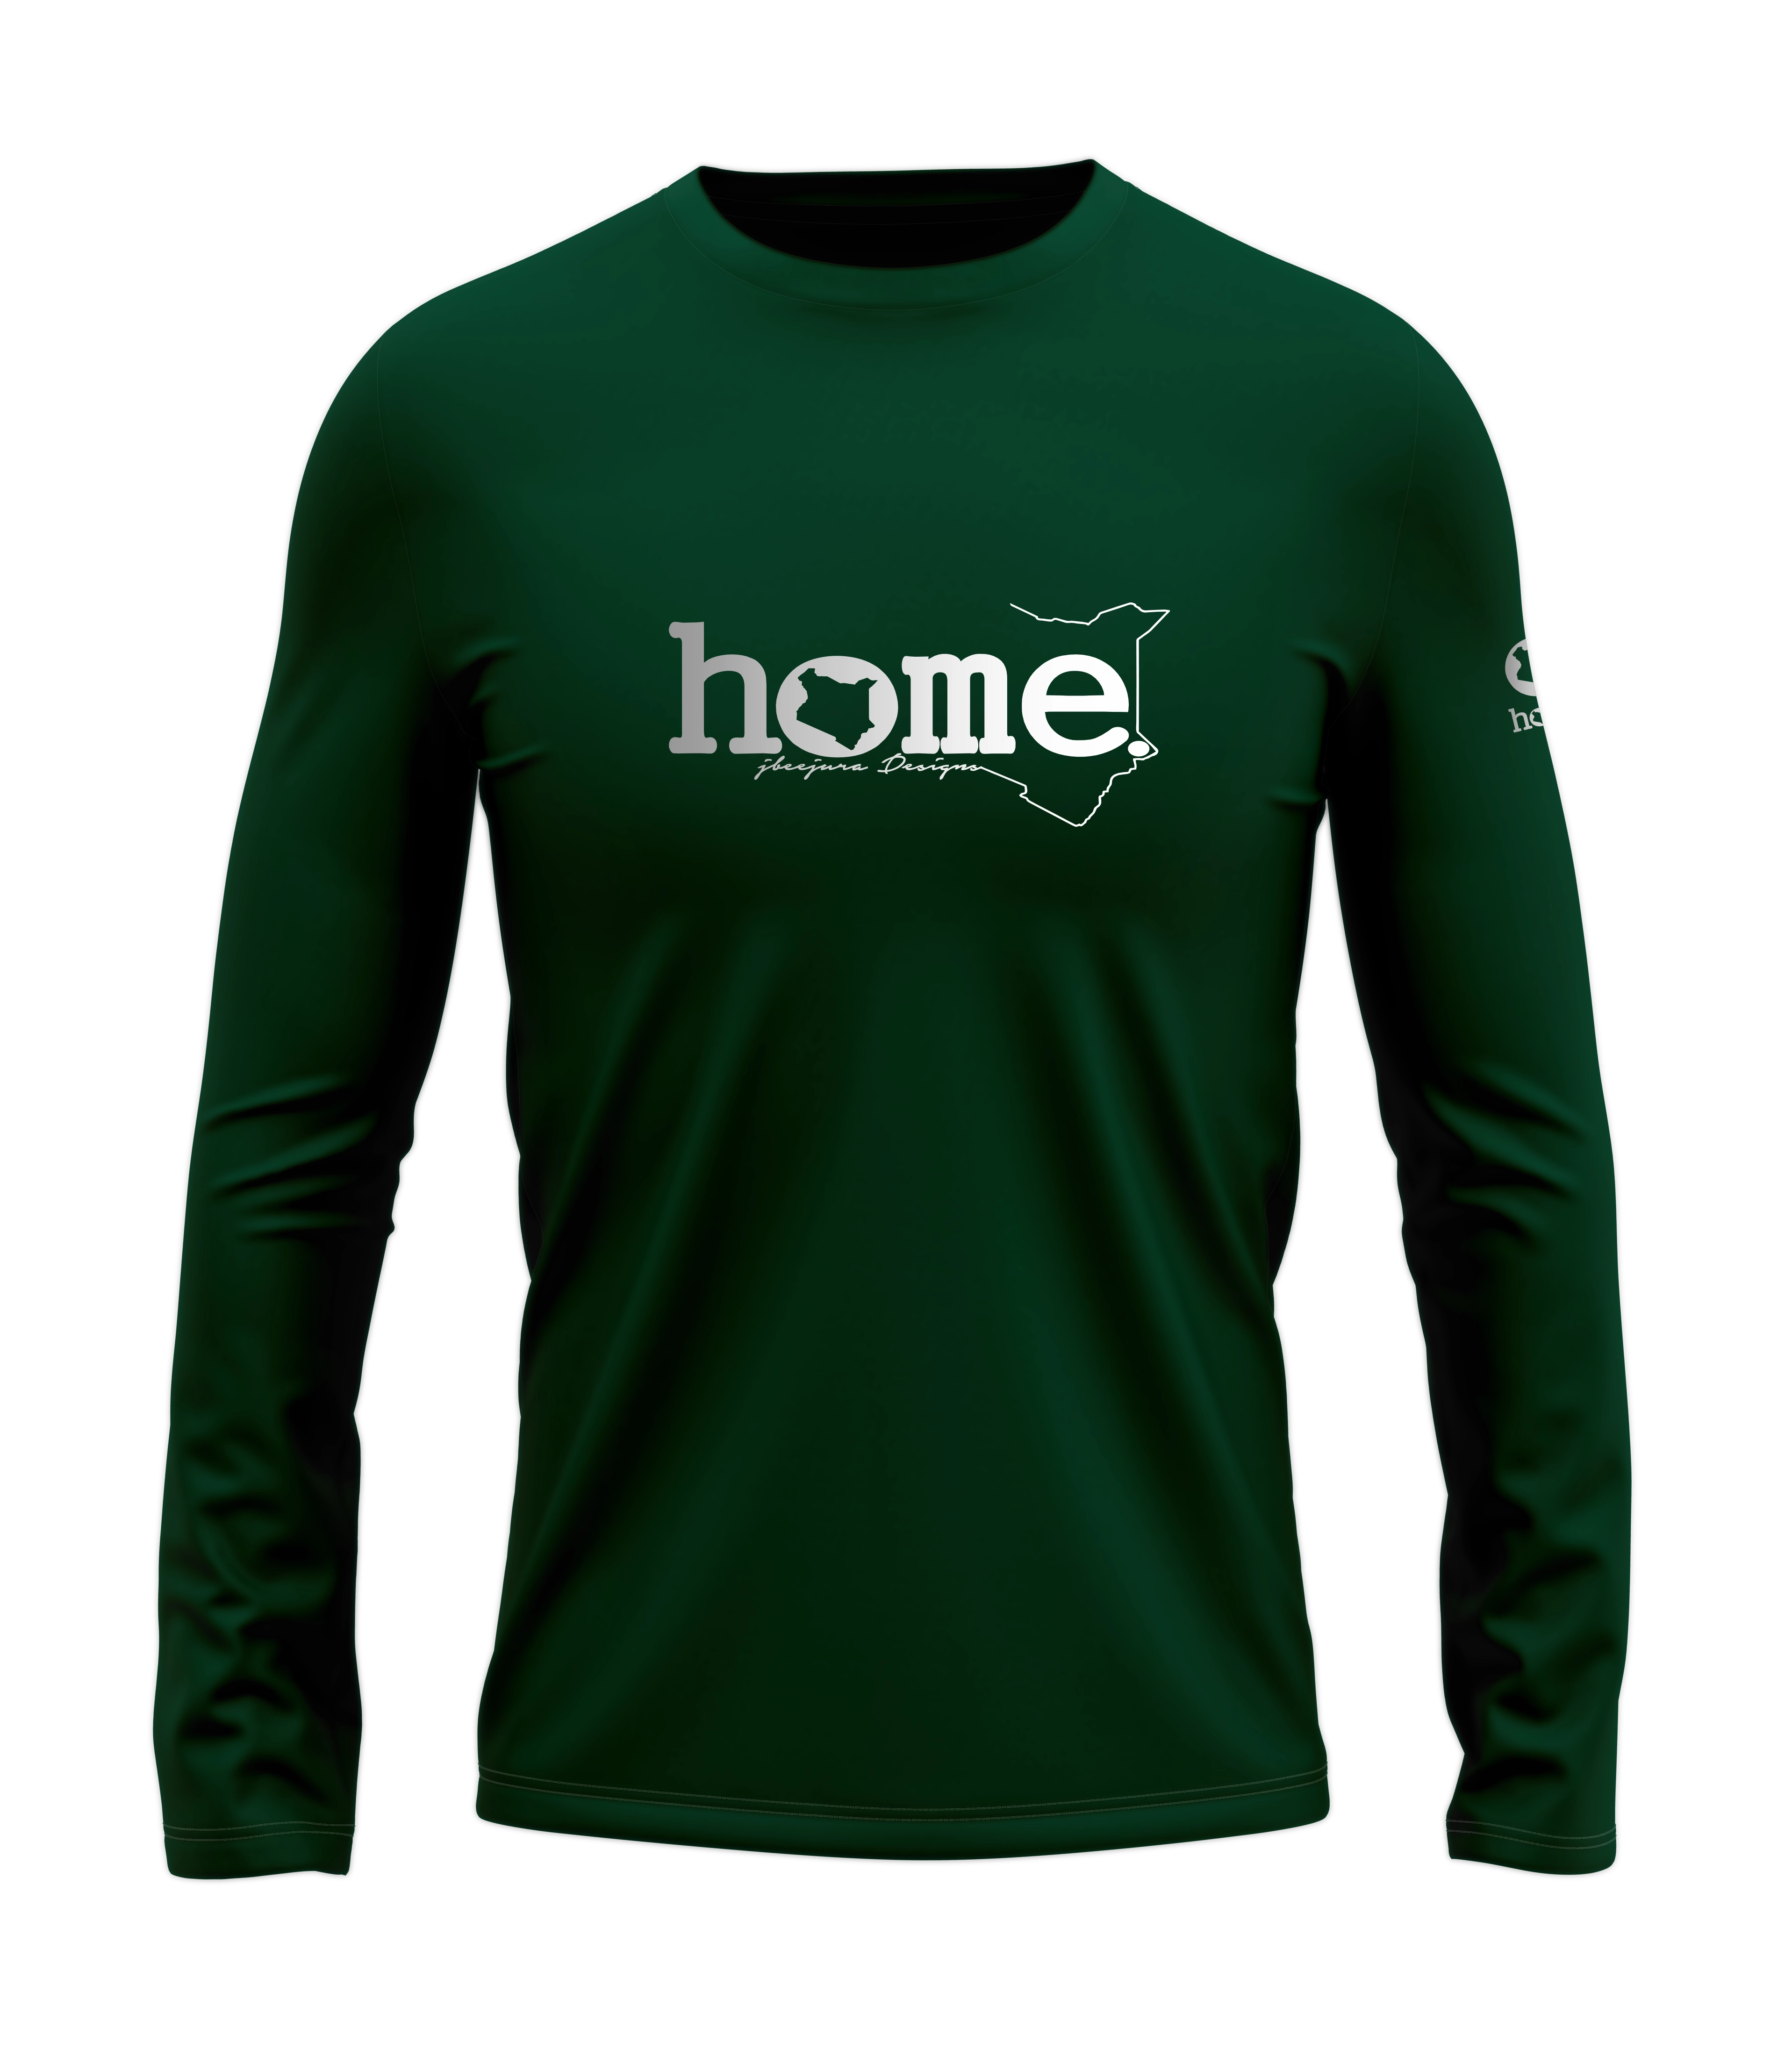 home_254 LONG-SLEEVED RICH GREEN T-SHIRT WITH A SILVER CLASSIC WORDS PRINT – COTTON PLUS FABRIC